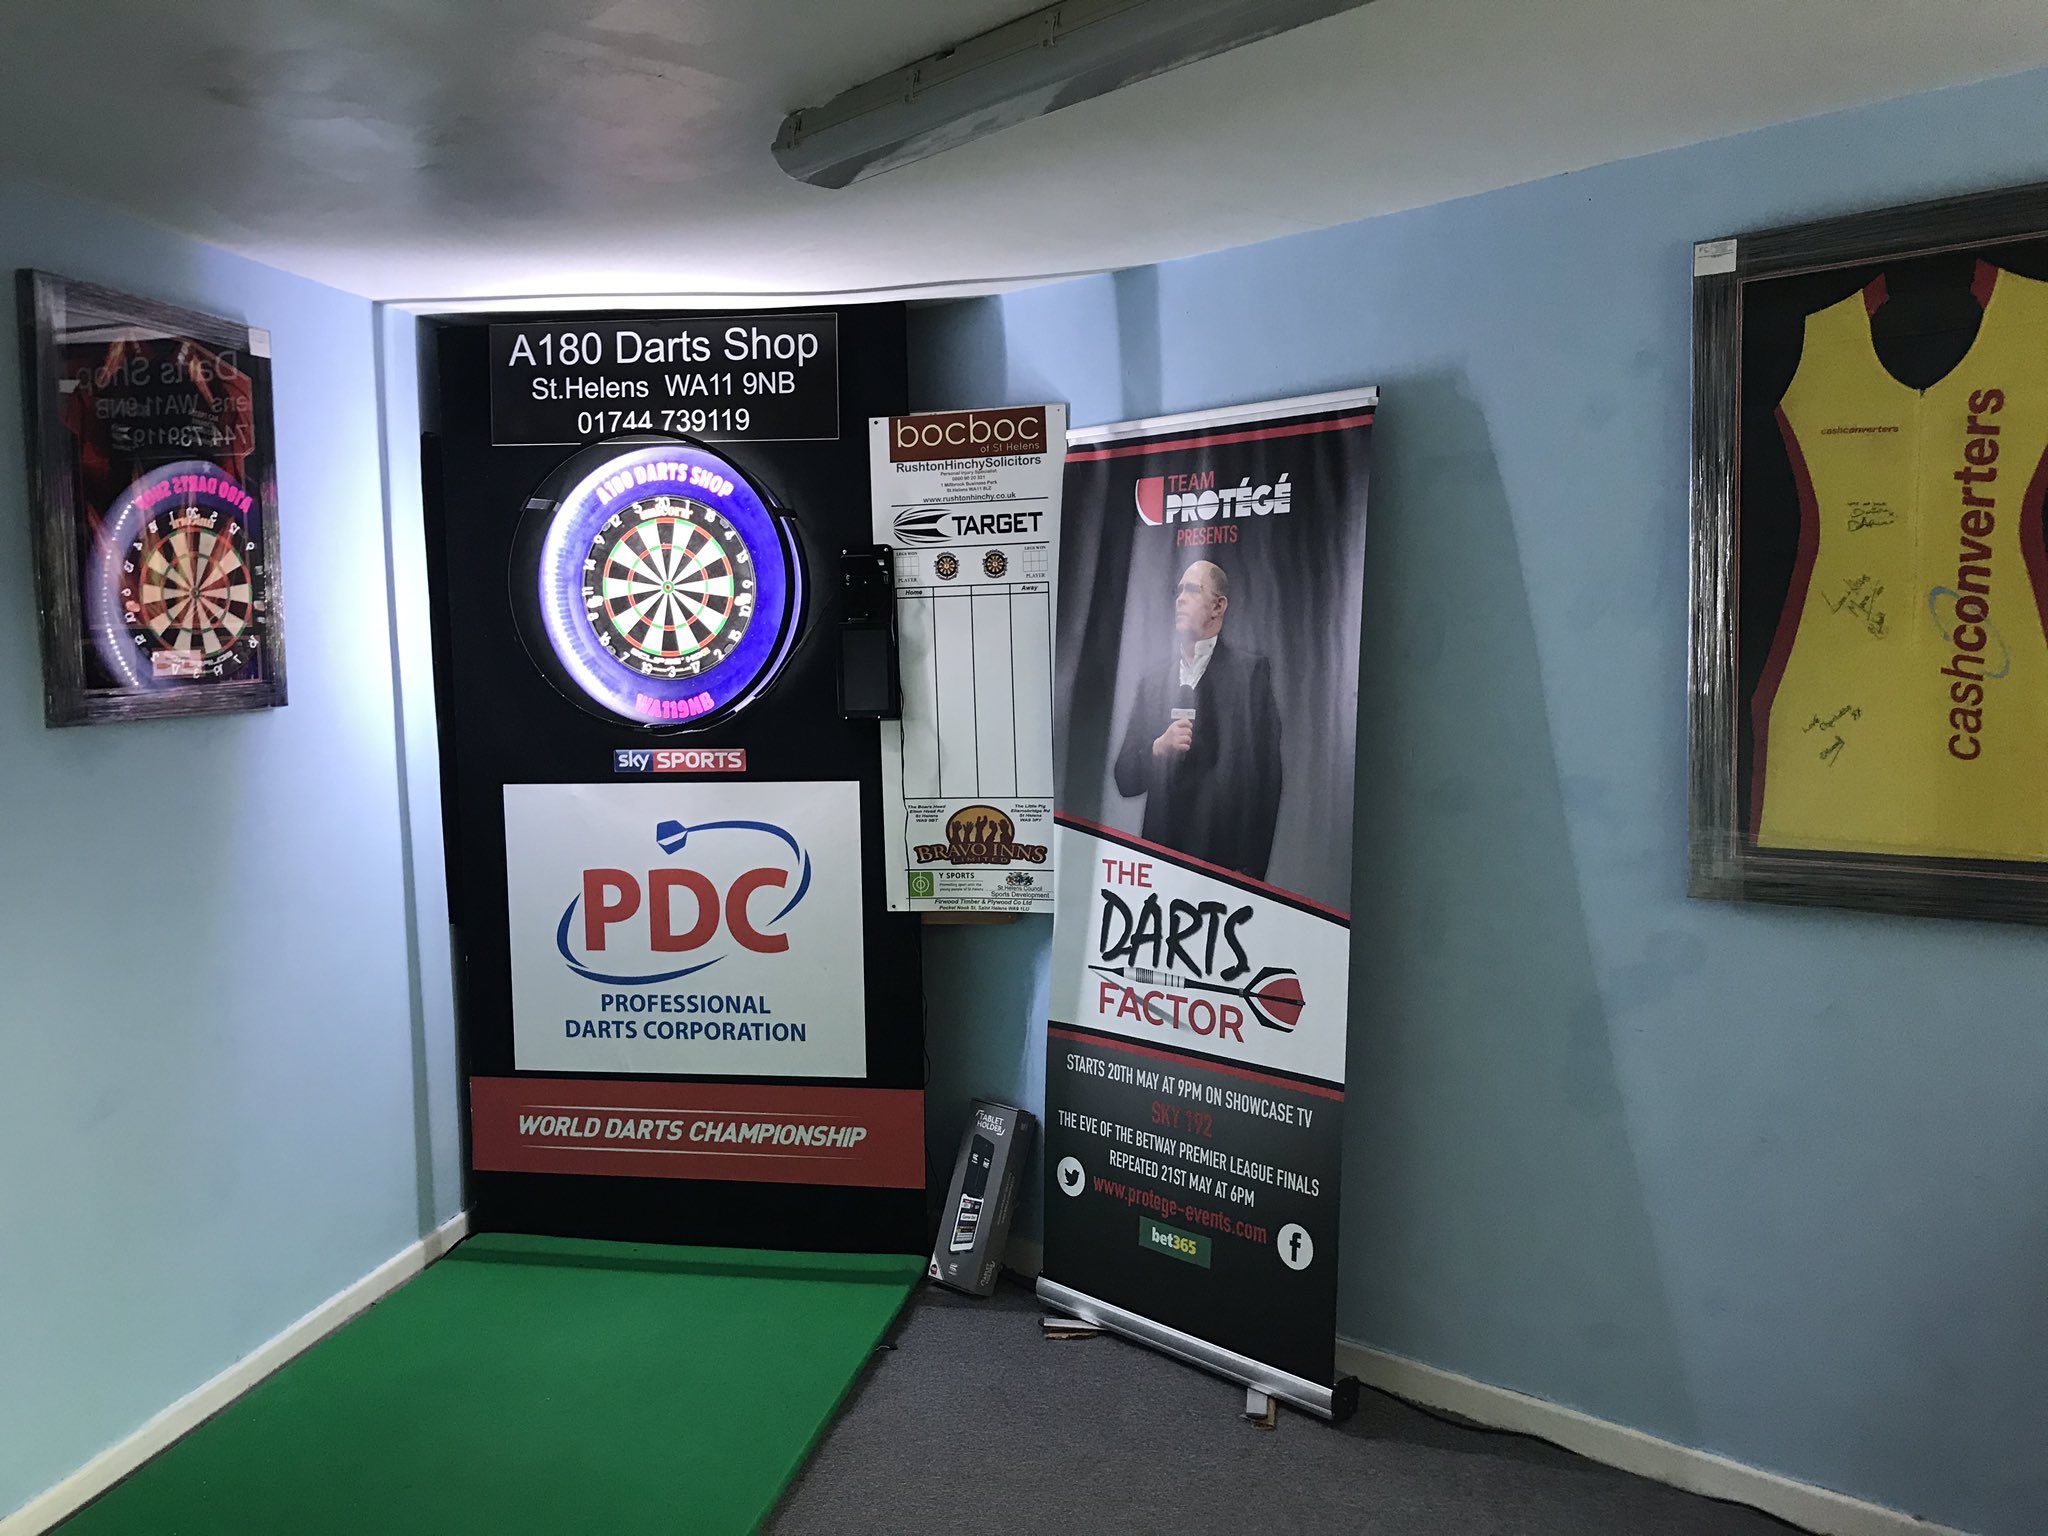 Serrated Claire skæbnesvangre A180DARTS on Twitter: "Our a180 #darts shop WA119NB open today 10am until  4pm, Mon-Fri 10am unil 5pm, @A180DARTSHOP #sthelens , call in for great  advice &amp; help with all your darting needs